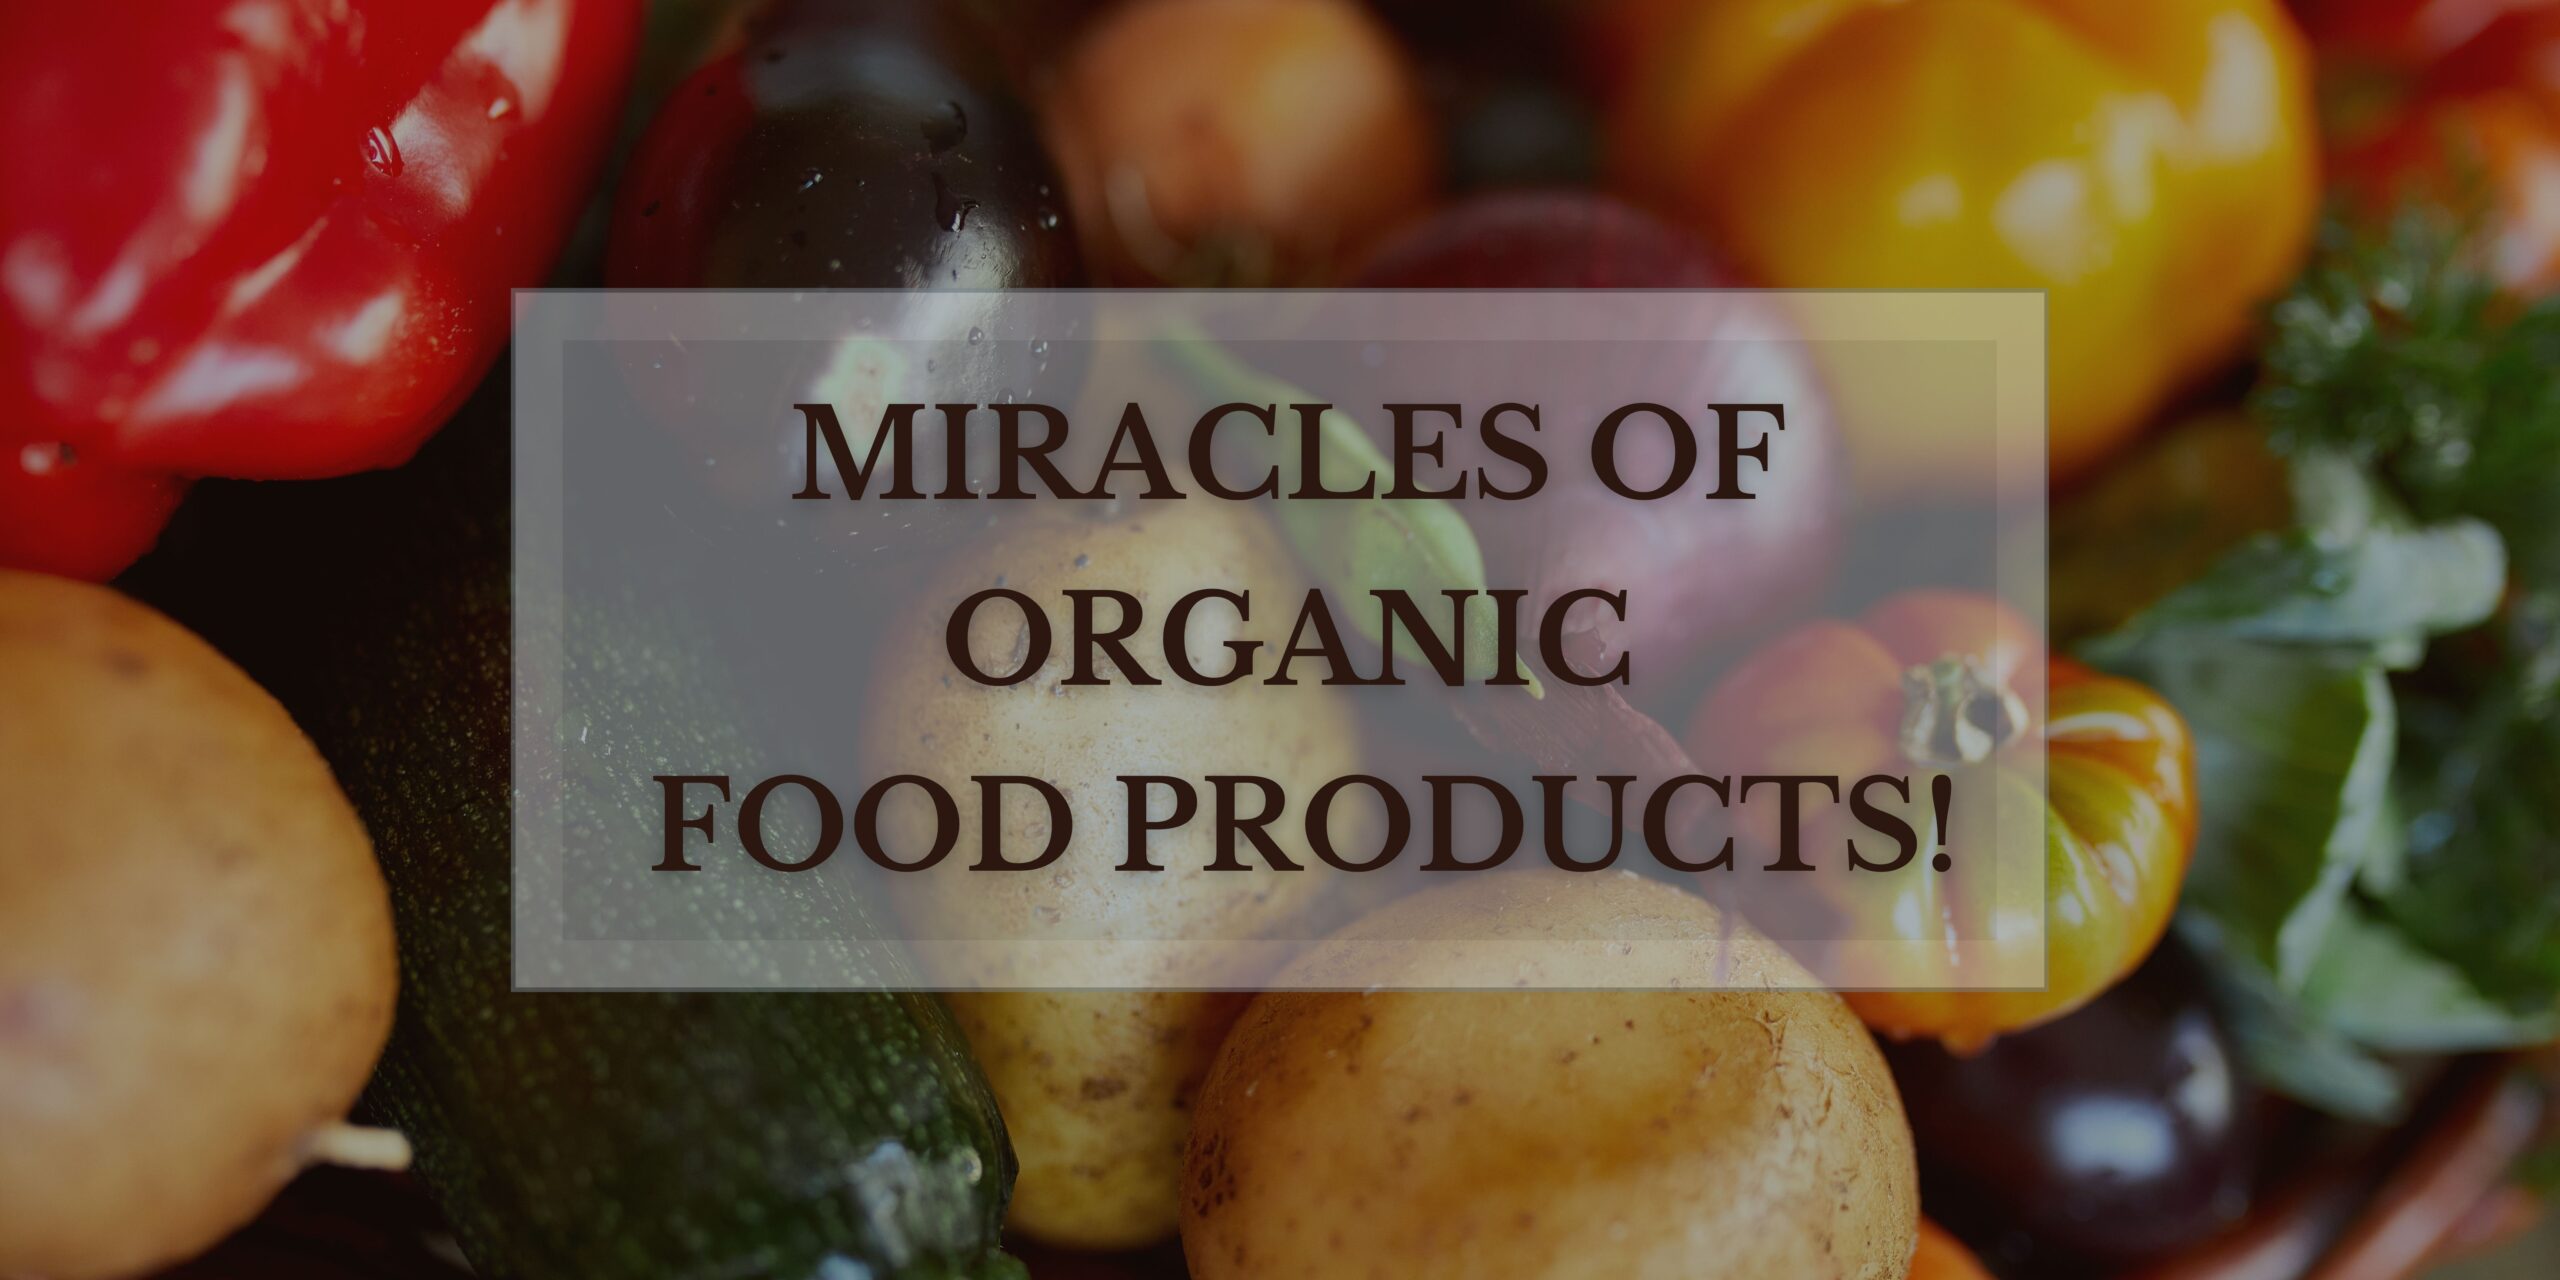 The Miracles of Organic Food Products